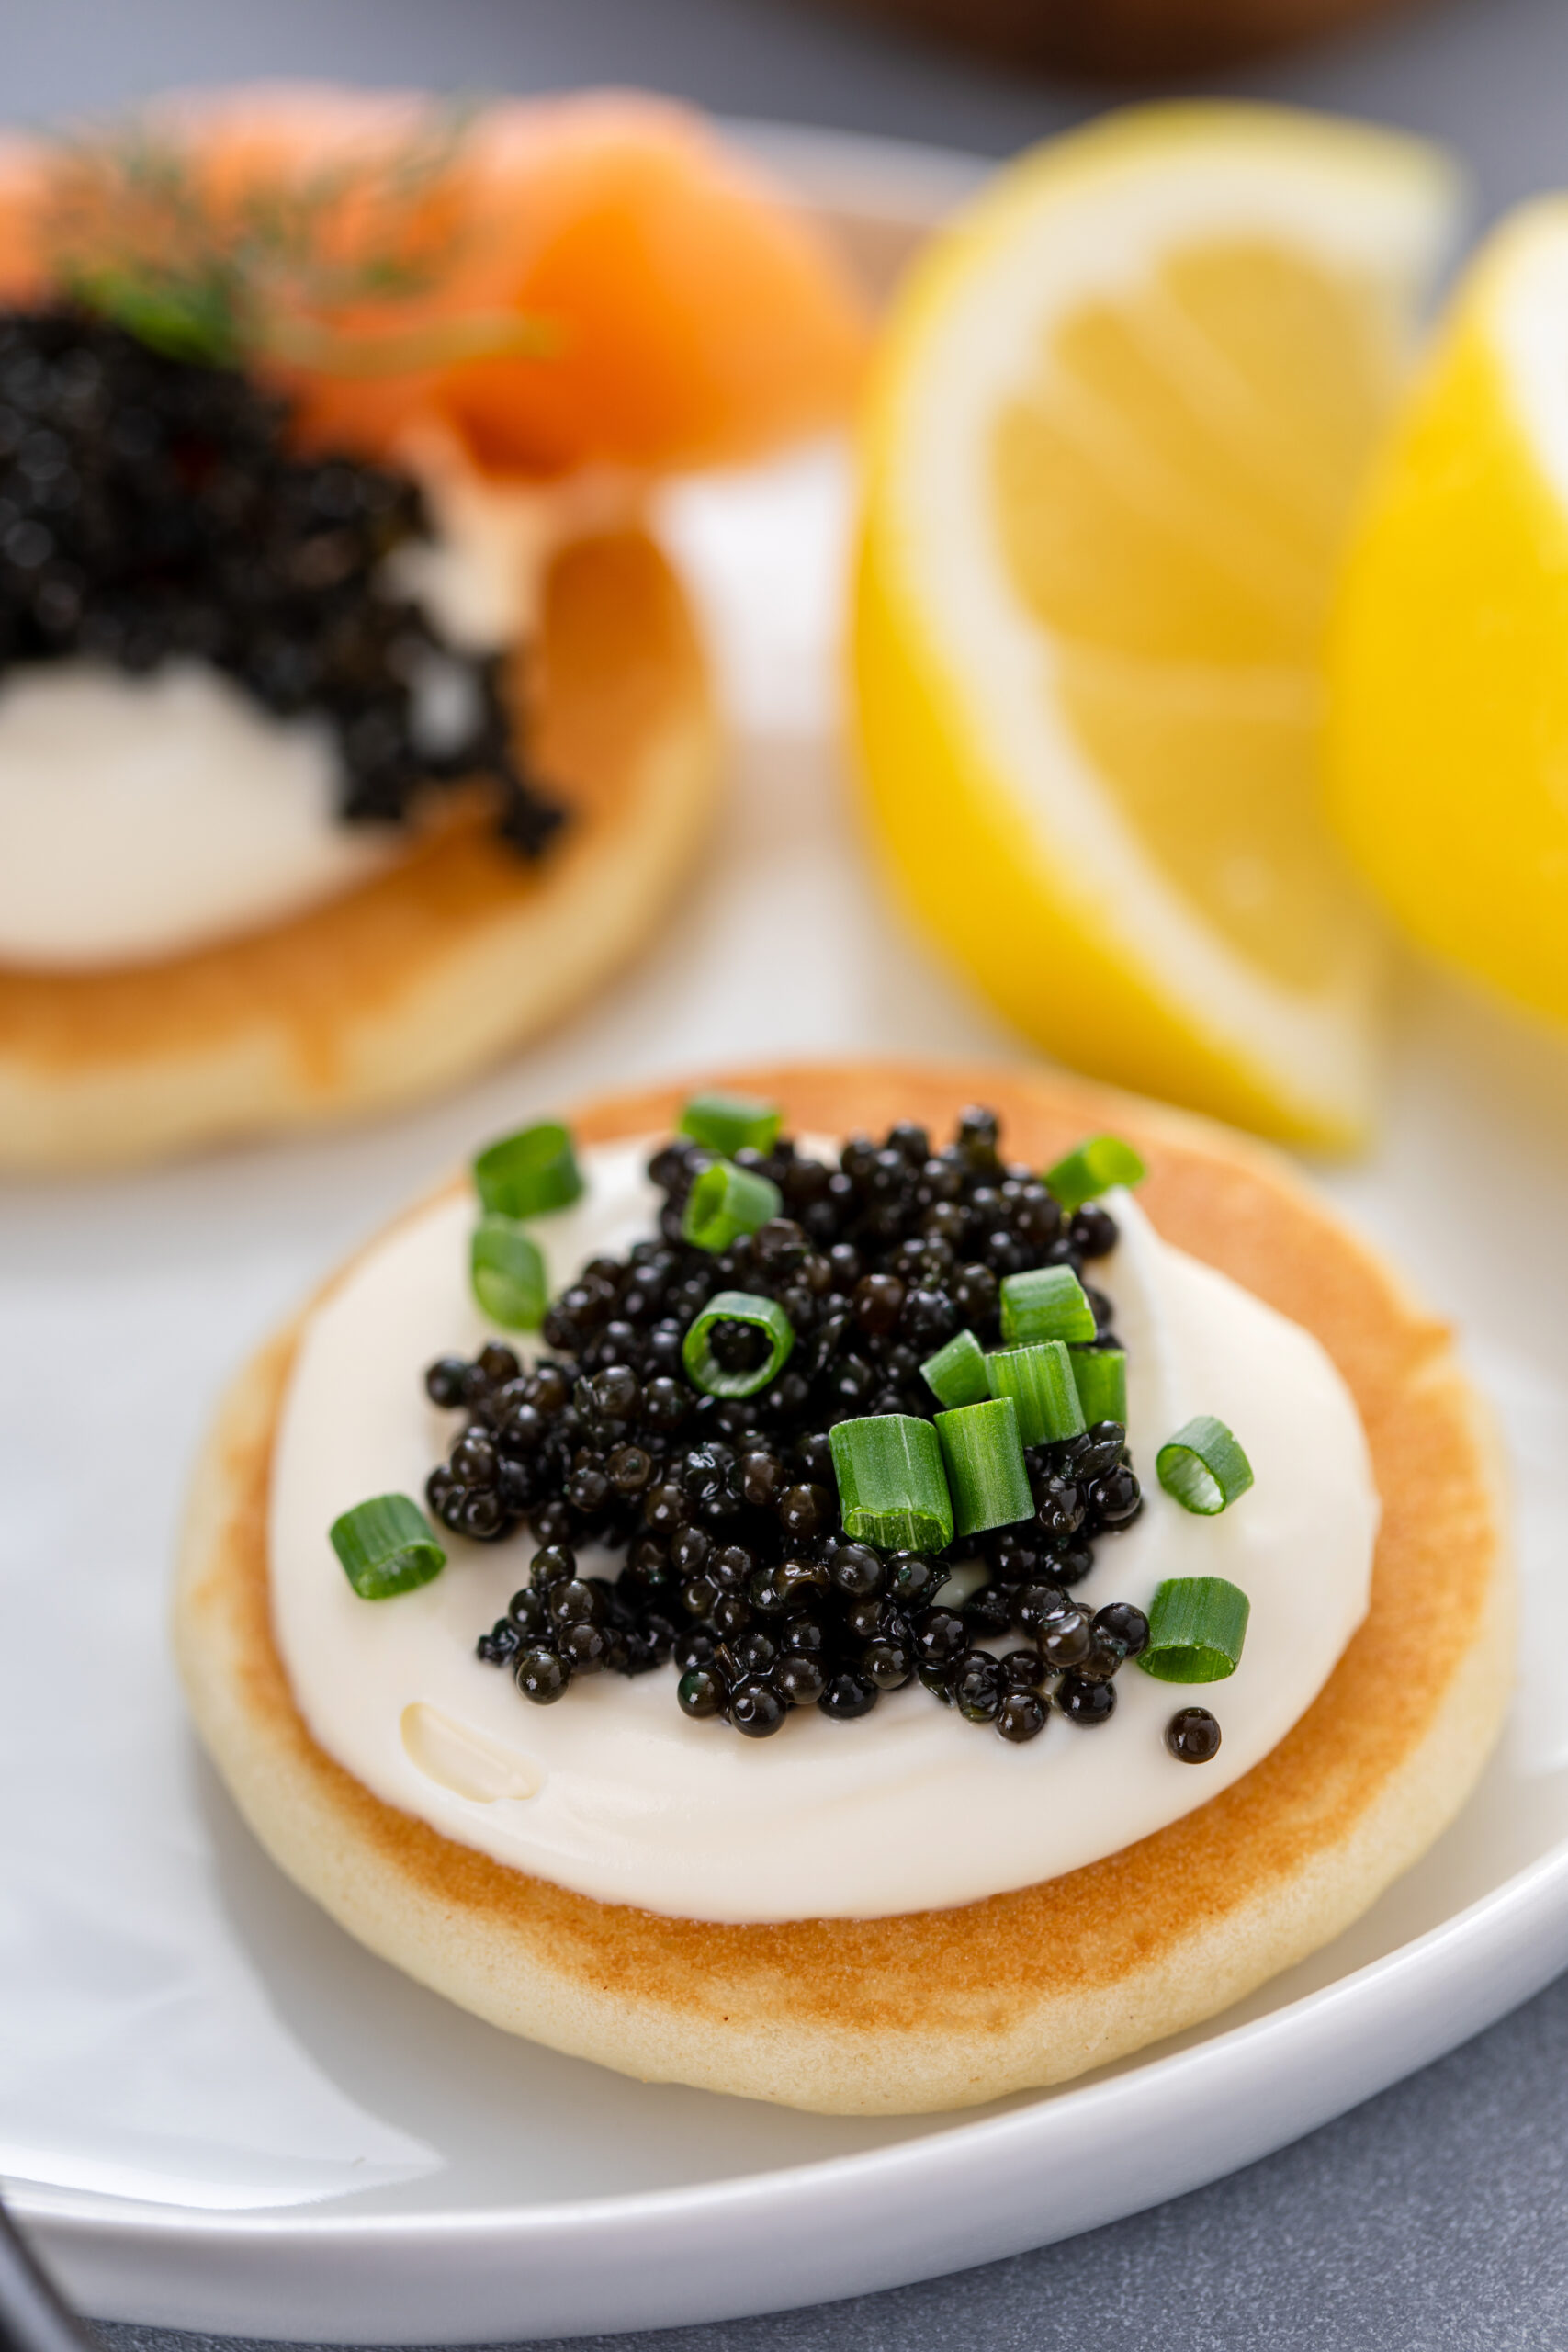 Looking to elevate your next dinner party? This is the perfect caviar board to do just that! CLICK HERE to make the perfect caviar board!